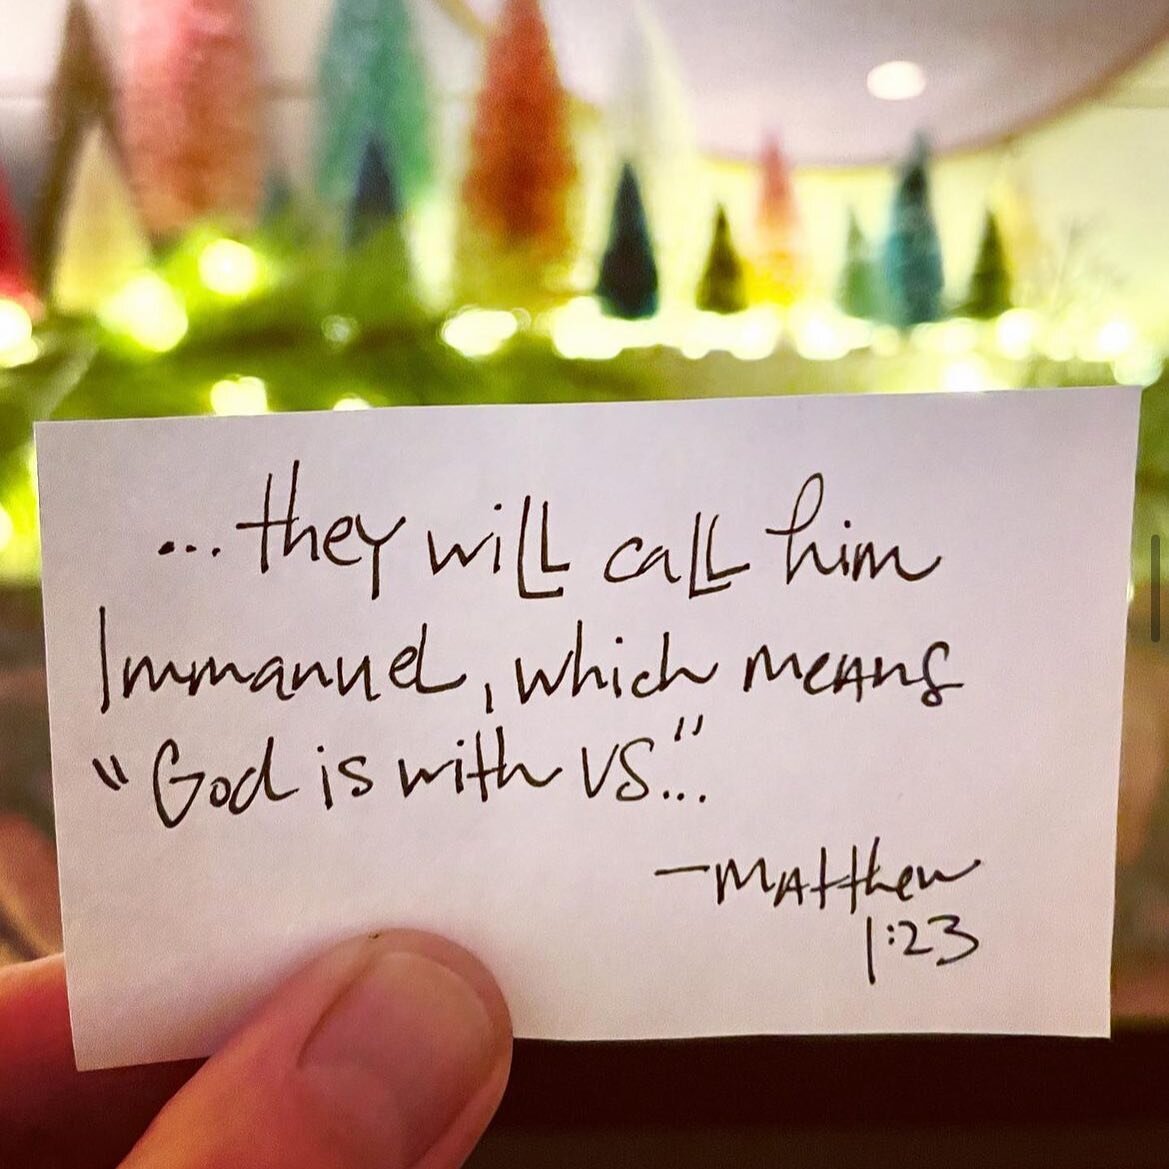 Immanuel. It&rsquo;s a total Christmas word. You only really hear it during this time of year. And I&rsquo;ll have you know, for most of my life I had no clue what it meant. 

But it&rsquo;s the best! ✨

Immanuel means The &ldquo;With-Us&rdquo; God. 